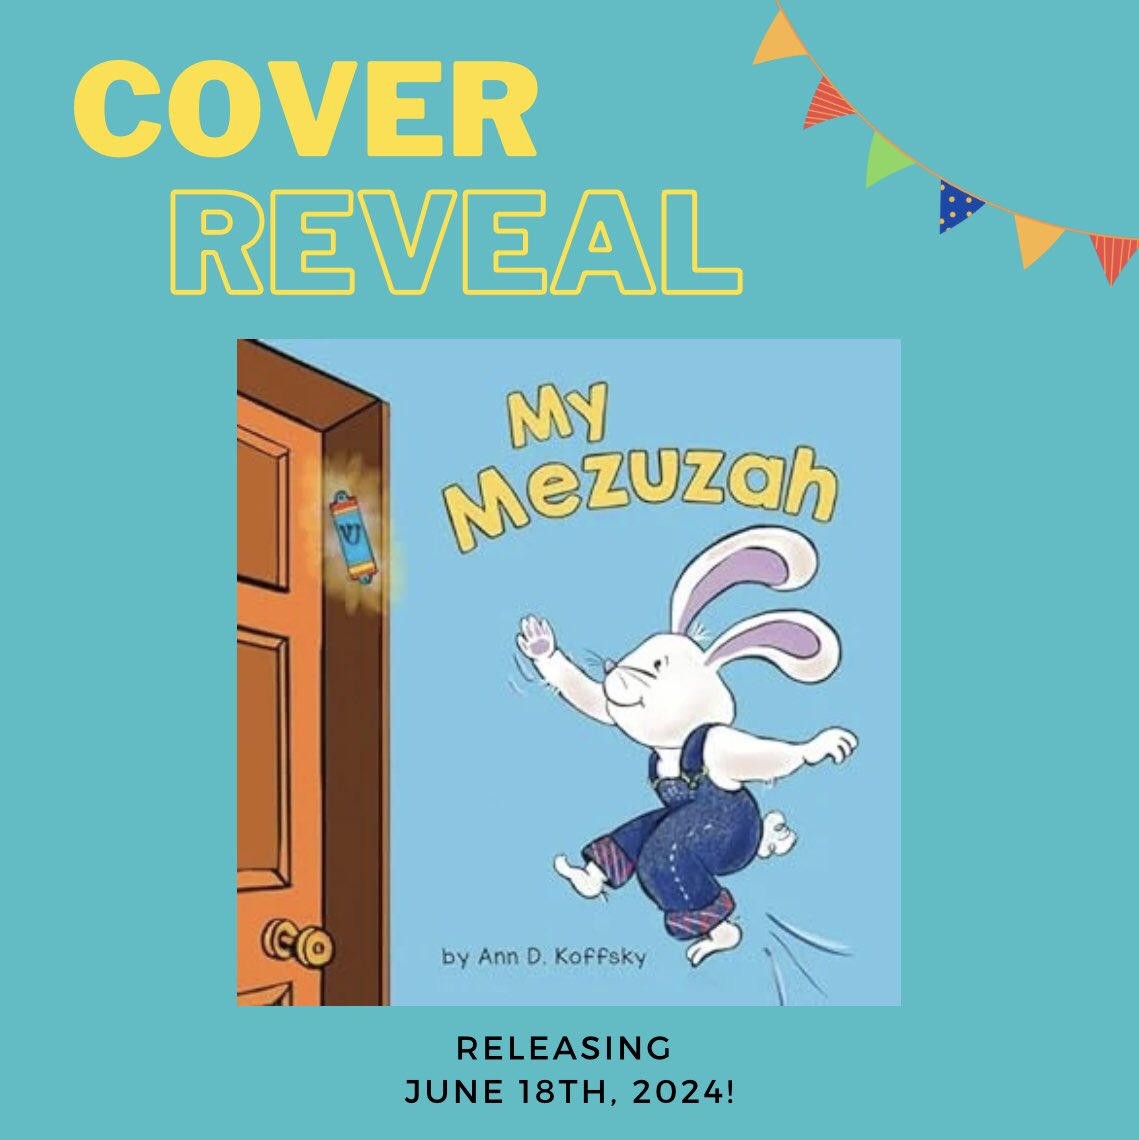 MY MEZUZAH by @AnnKoffsky releases this June with Apples and Honey Press! A young rabbit jumps to try to touch the mezuzah on the doorpost in this board book about trying and trying again. We can’t wait for you to read it! Pre-order now: a.co/d/gLvYN42